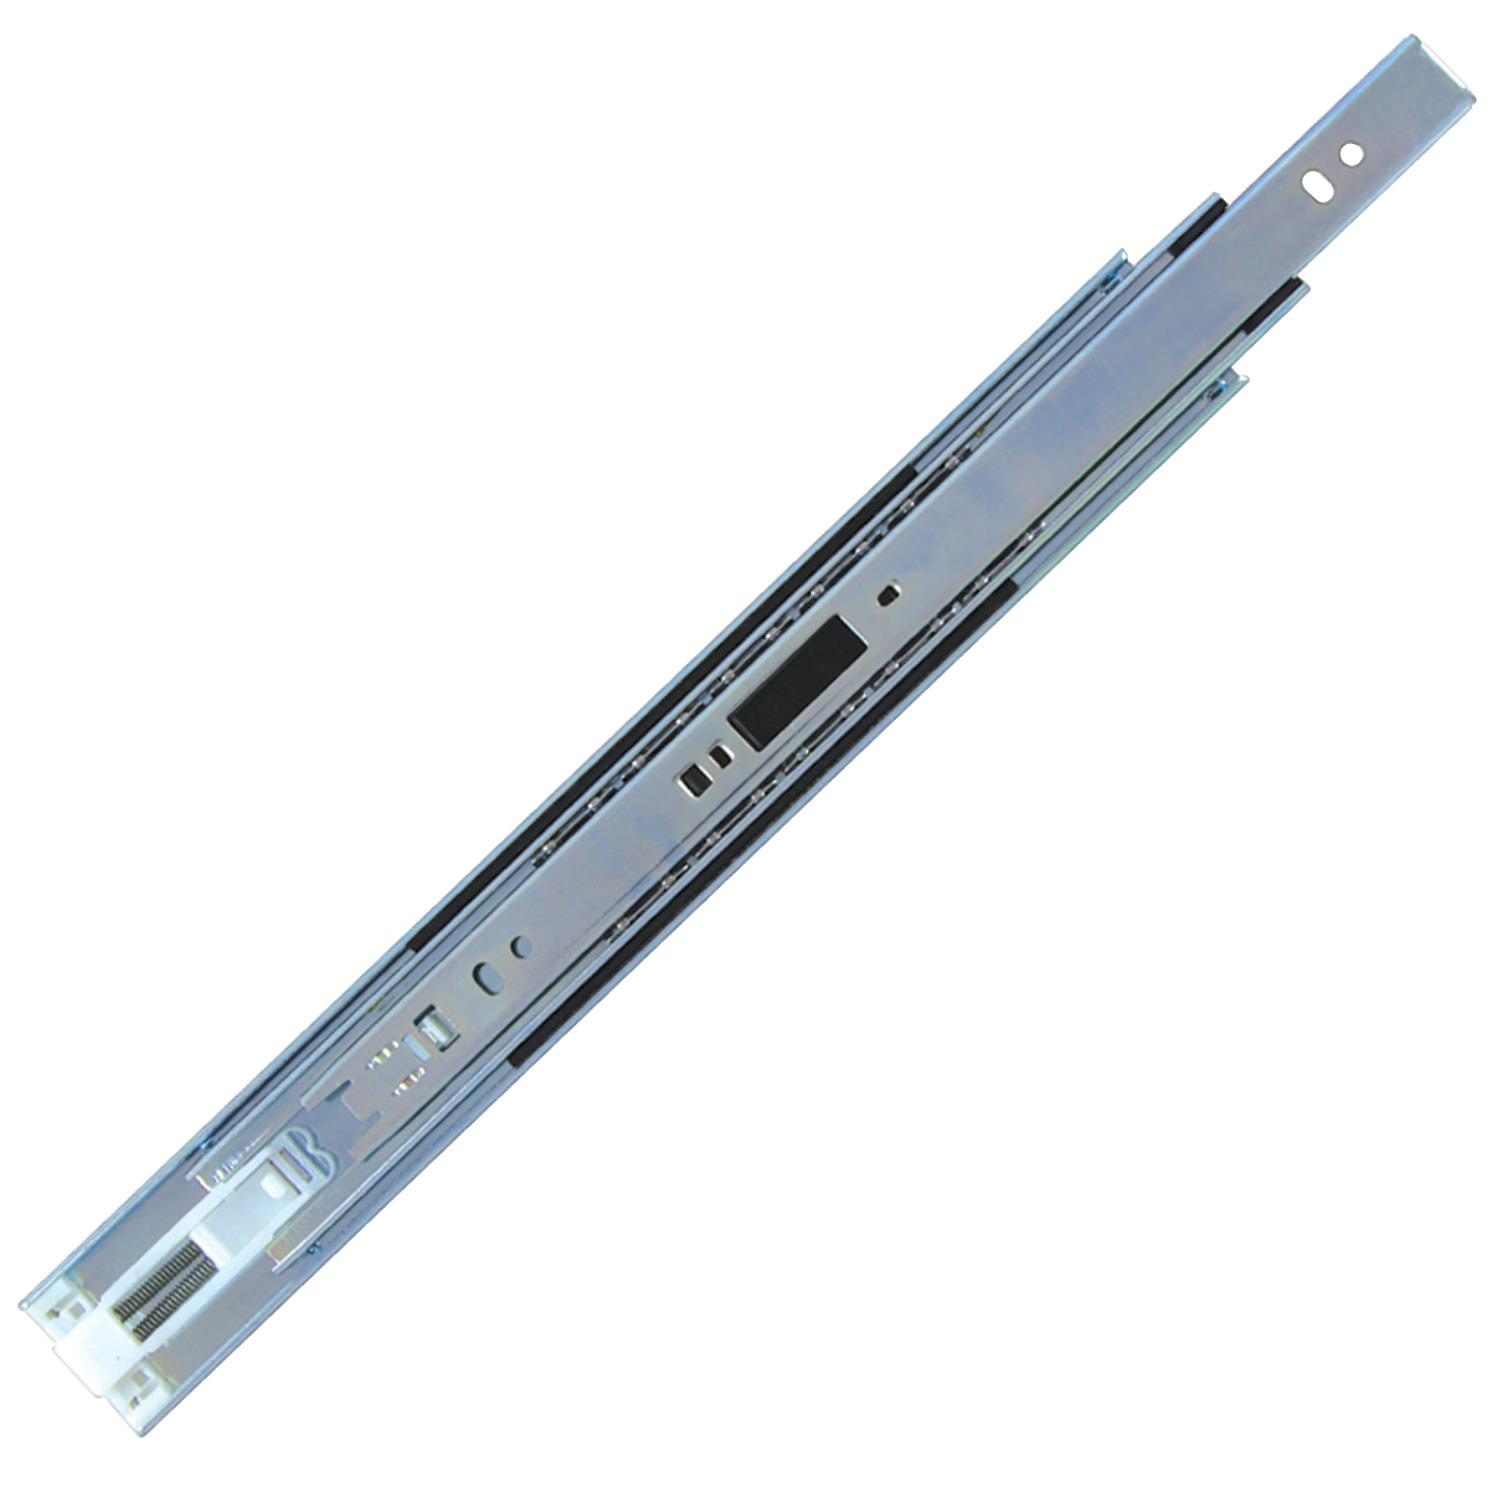 P4050.AC0250 Drawer Slide Full Extn Length 250; Load 30kg per pair. Sold Individually. Lever Disconnect; Soft Close